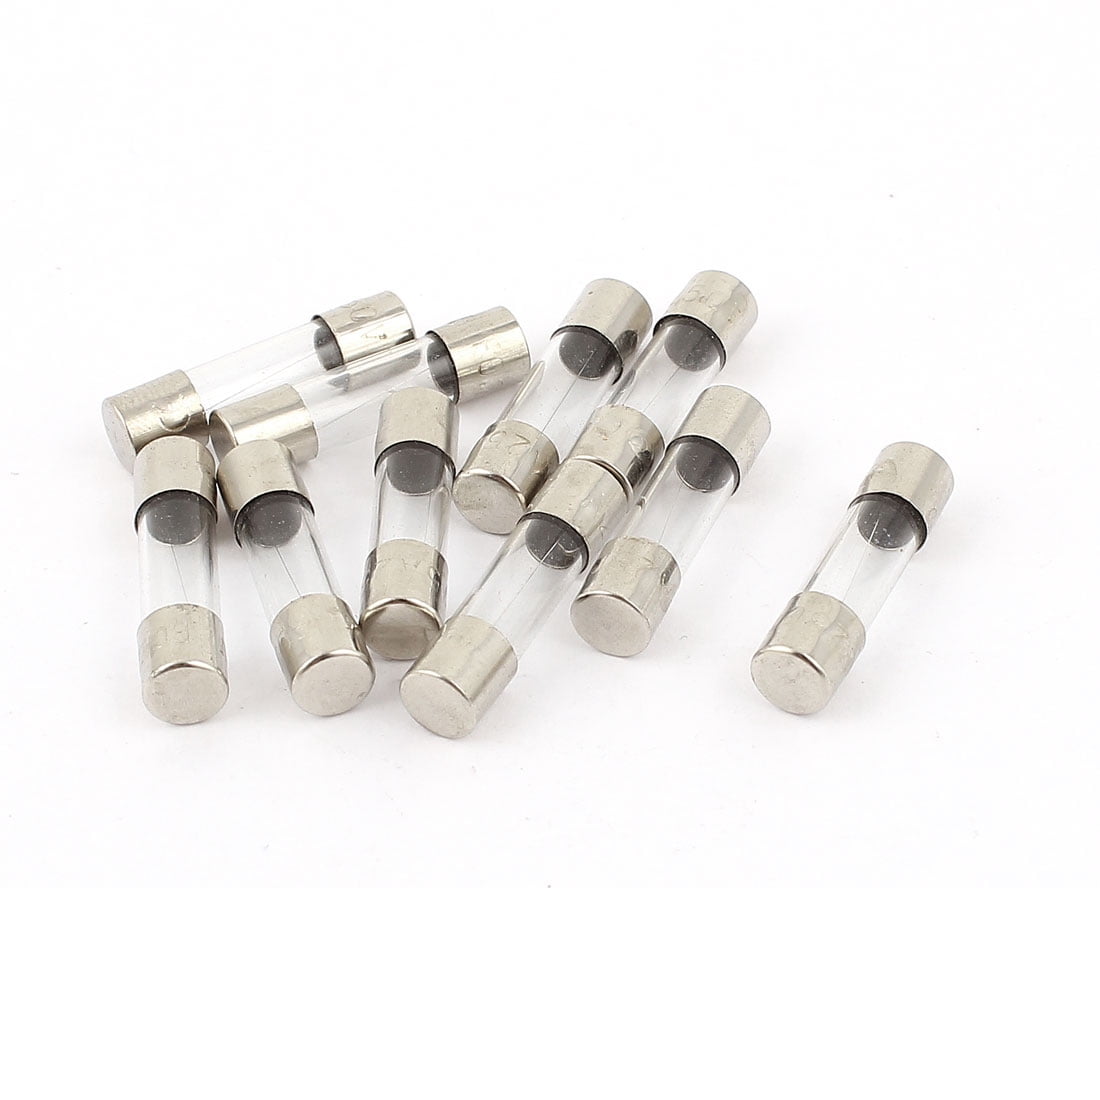 2-5 10 or 20 fast 5x20mm glass fuse 250v 12a fast fuse 